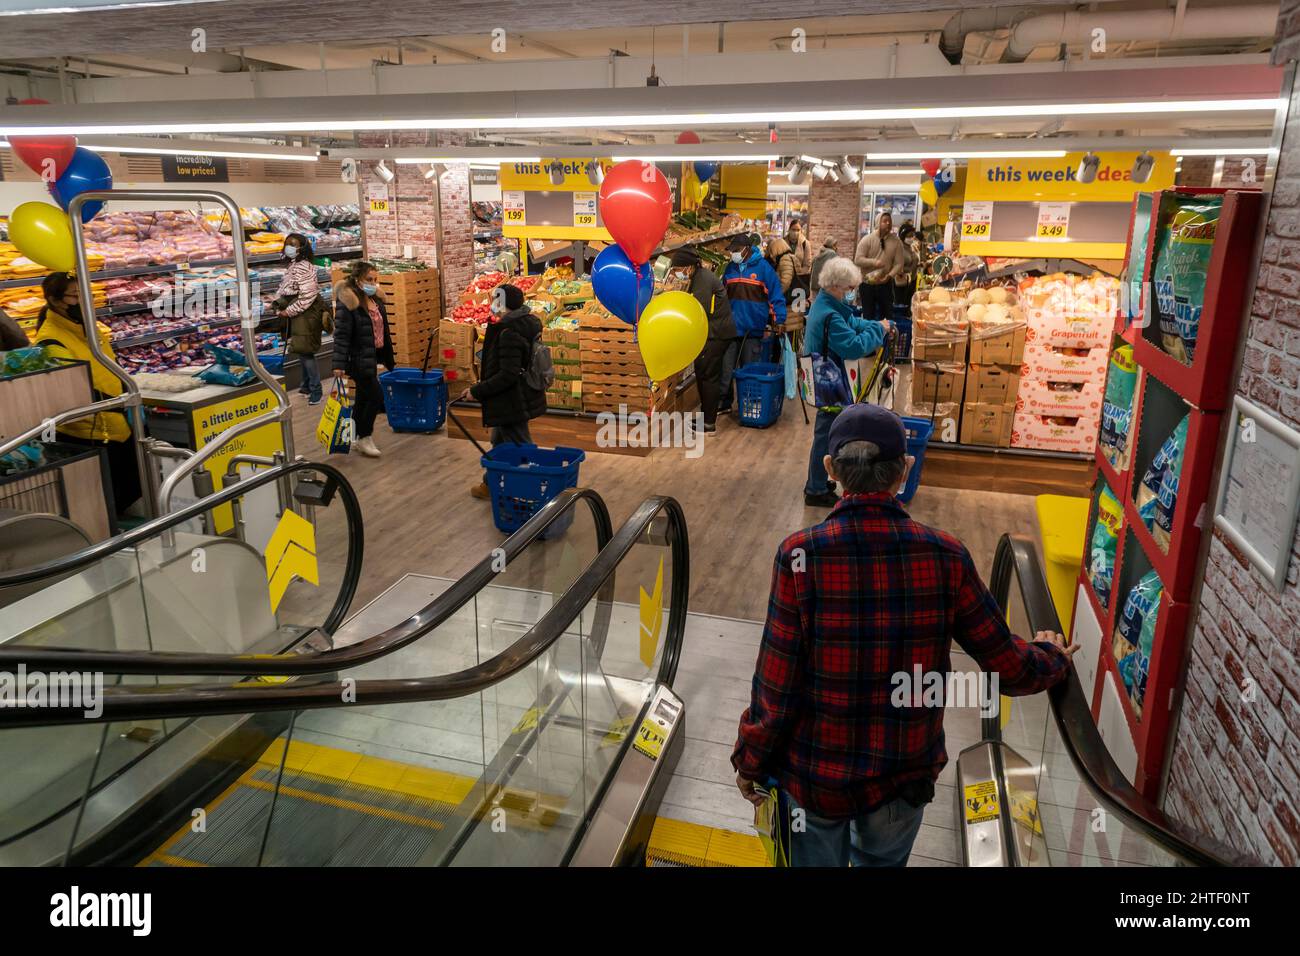 Shoppers attend the grand opening of a Lidl supermarket in Harlem in New York on Wednesday, February 23, 2022. Global unrest in the Ukraine is predicted to take its toll on consumers at they cut back on spending. Americans are encountering the highest inflation rate in 40 years, as consumer spending fell last month, the most since February 2021. (© Richard B. Levine) Stock Photo